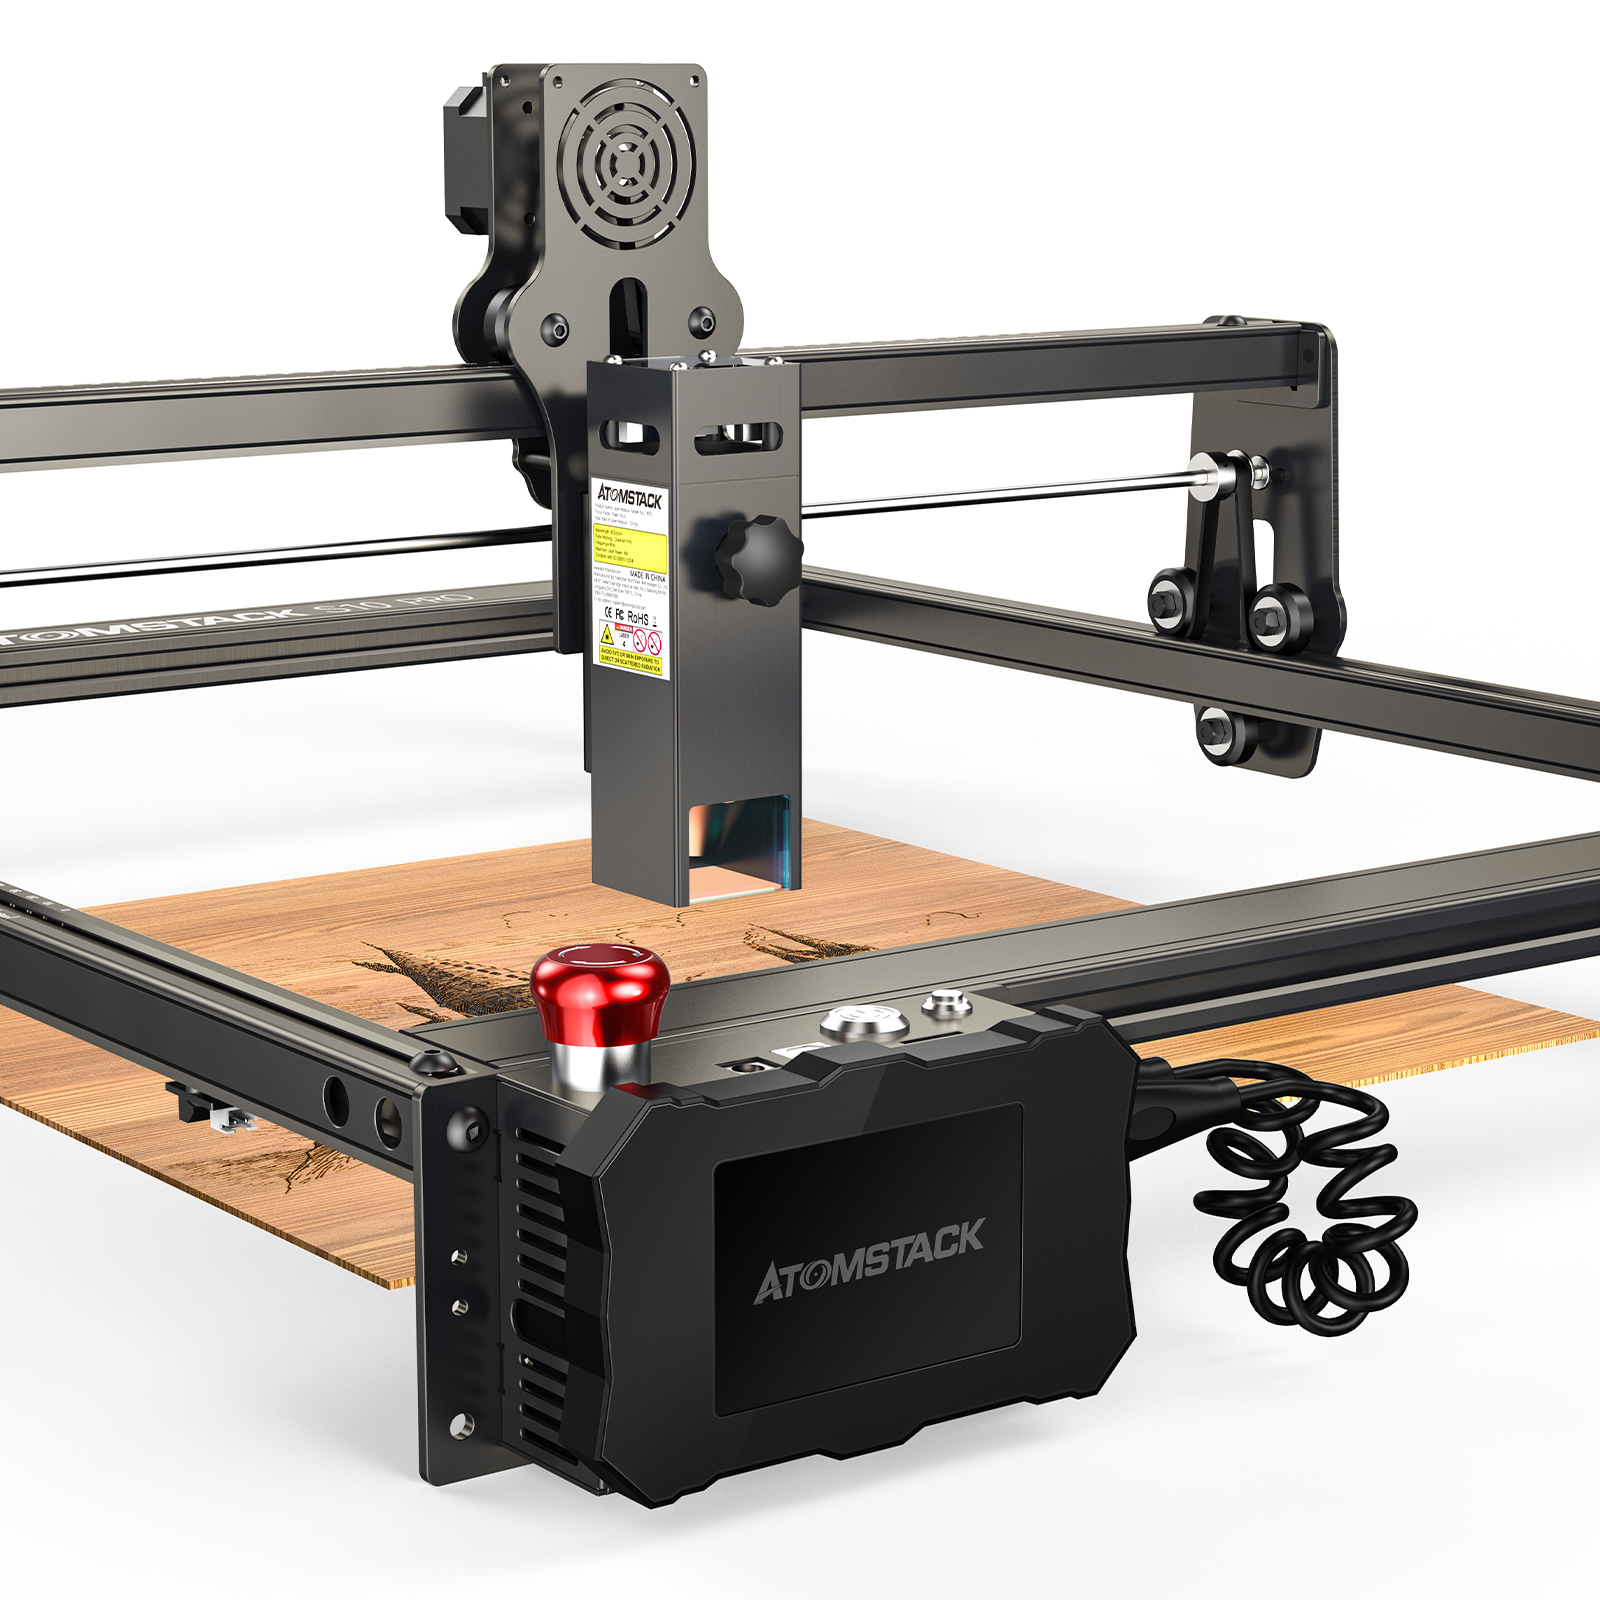 Find EU Direct ATOMSTACK S10 PRO Flagship Dual Laser Laser Engraving Cutting Machine Support Offline Engraving Laser Engraver 10W Output Power Fixed Focus 304 Mirror Stainless Steel Engraving Metal Wood Leather Acrylic DIY Engraver for Sale on Gipsybee.com with cryptocurrencies